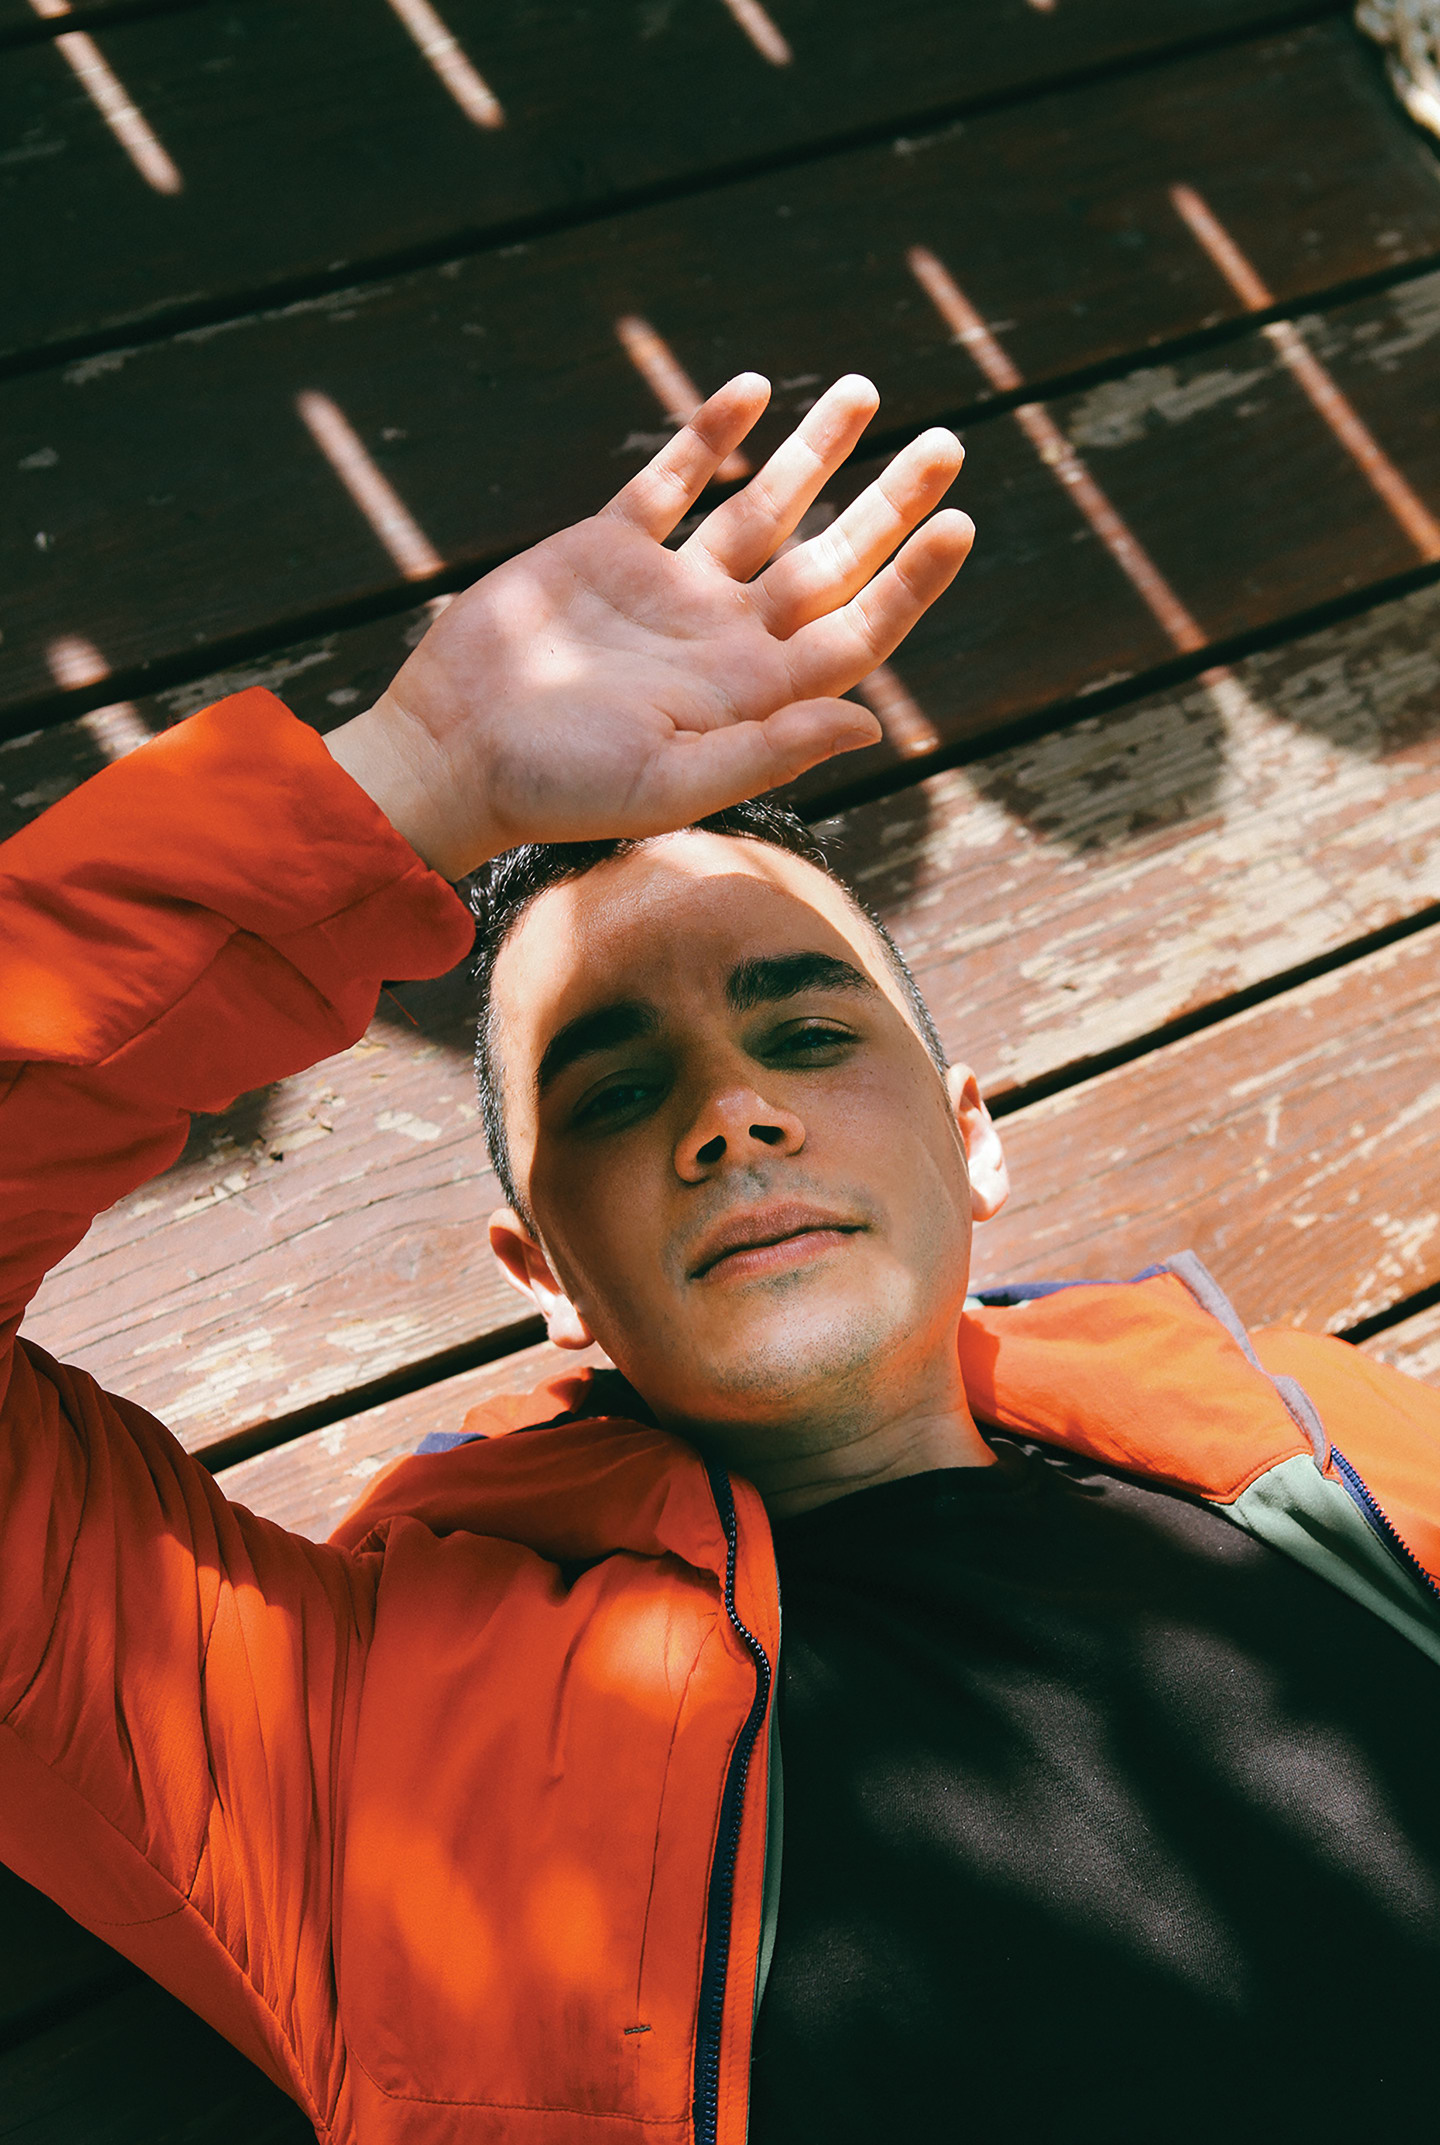 Rostam: "Maybe It Could Have Been Different From The Beginning"